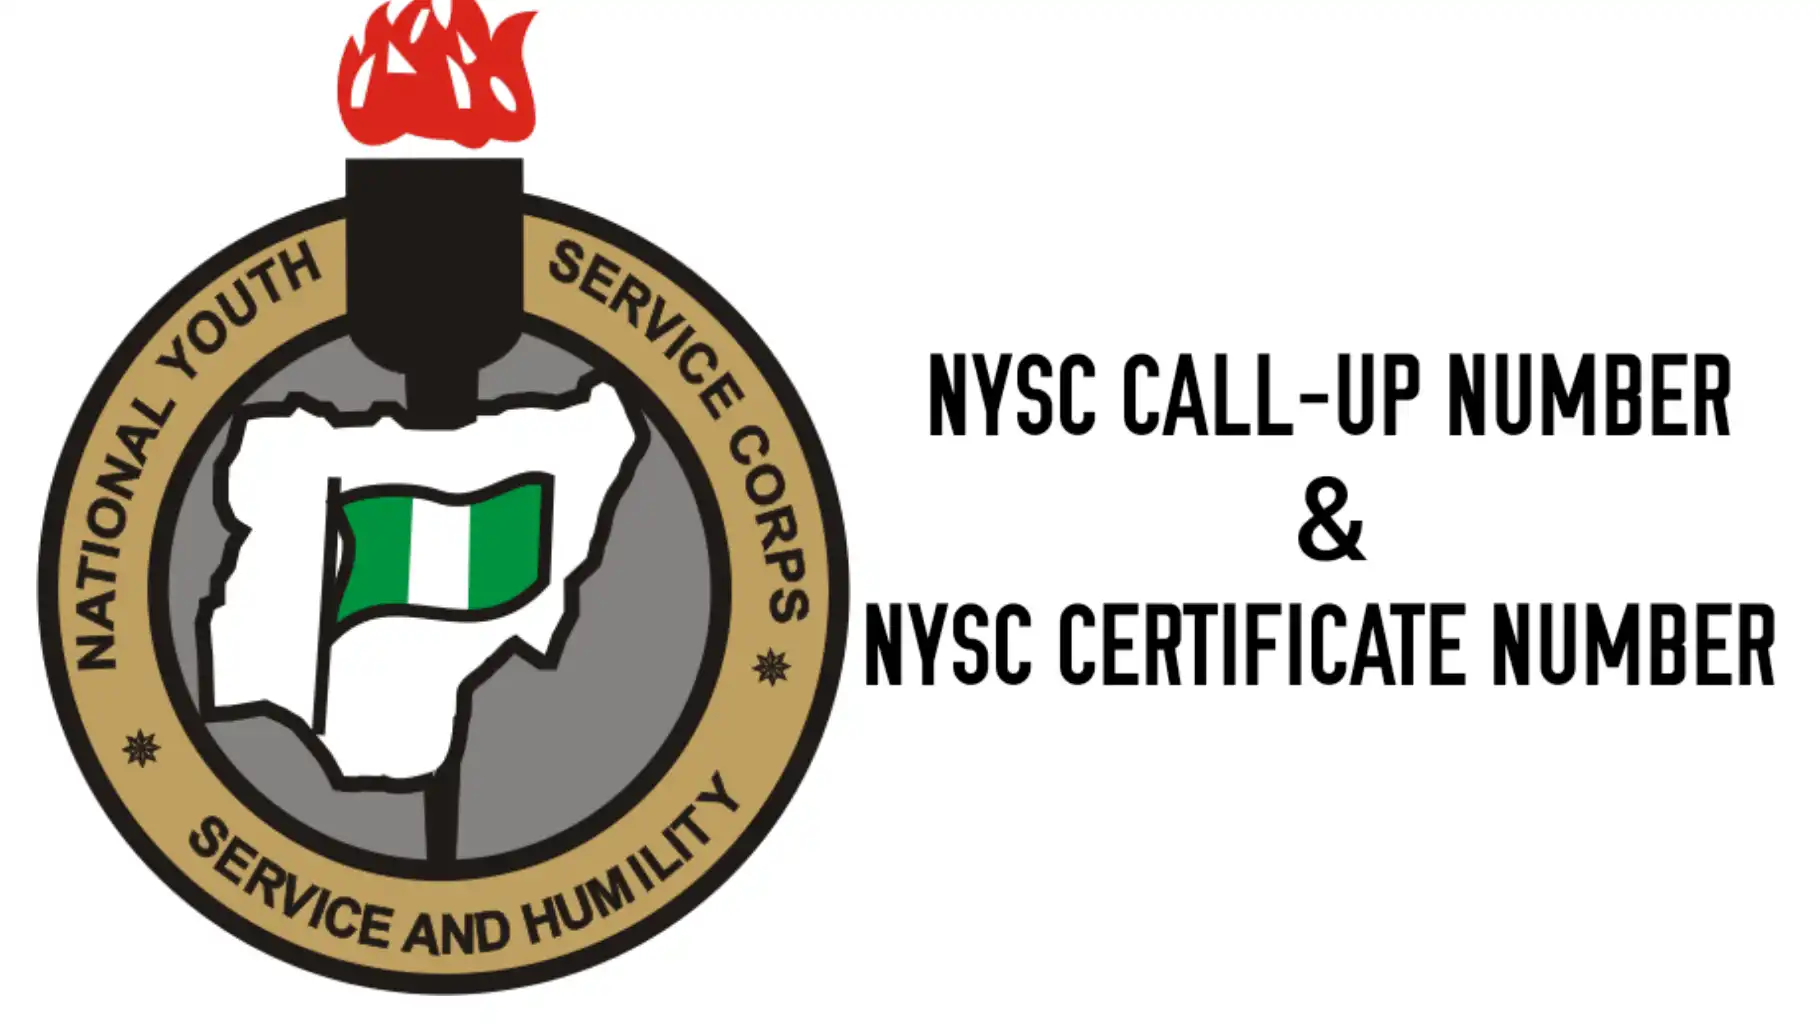 Major Difference Between NYSC Call-Up Number and NYSC Certificate Number